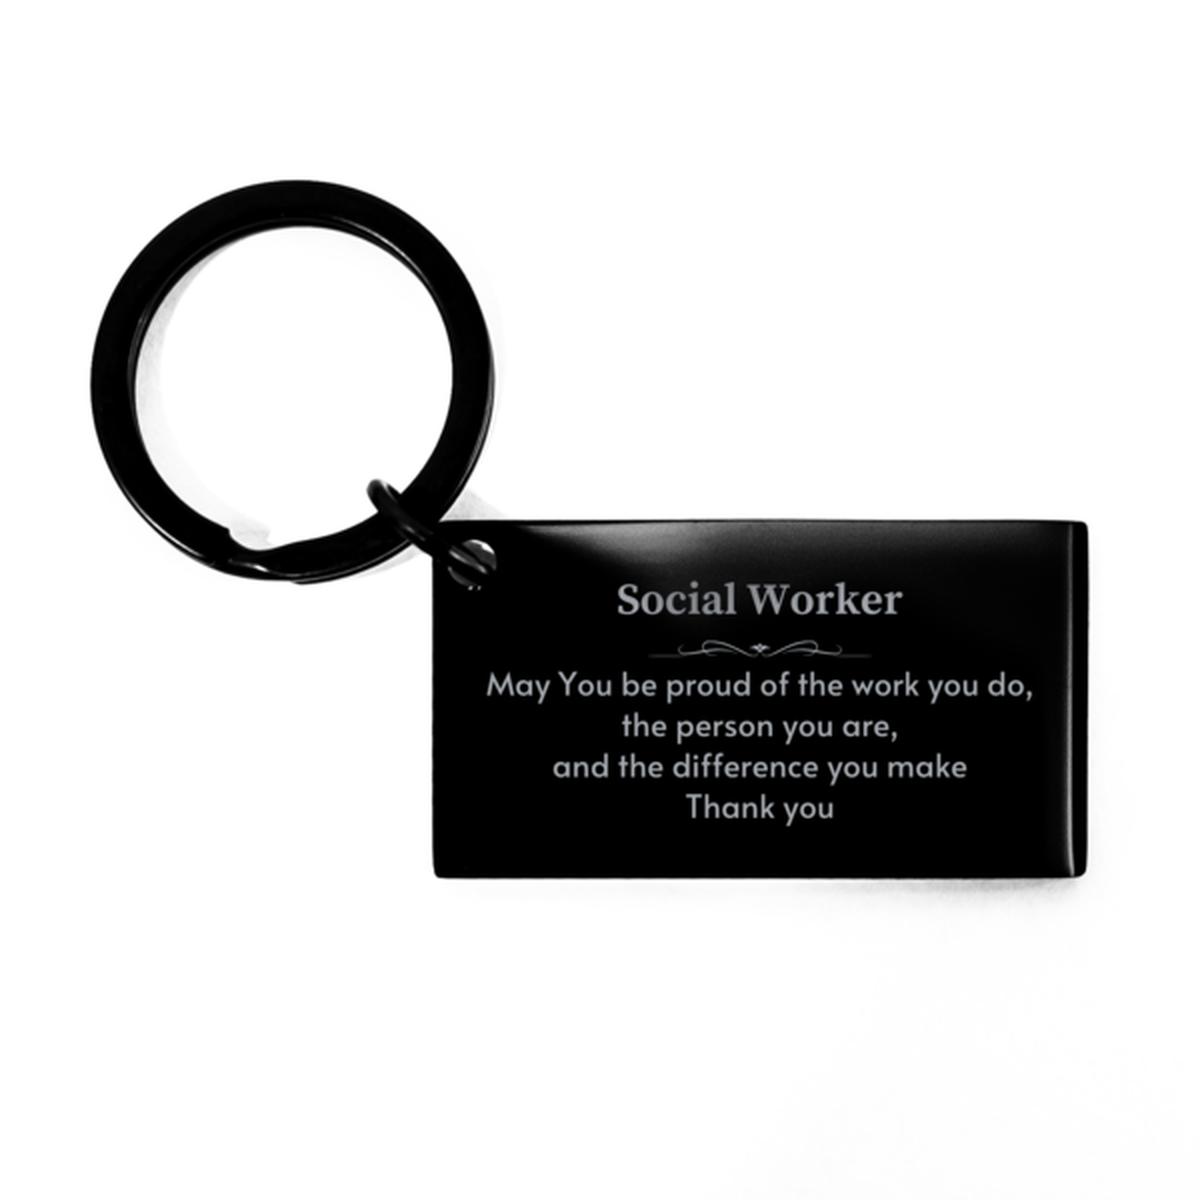 Heartwarming Keychain Retirement Coworkers Gifts for Social Worker, Waiter May You be proud of the work you do, the person you are Gifts for Boss Men Women Friends